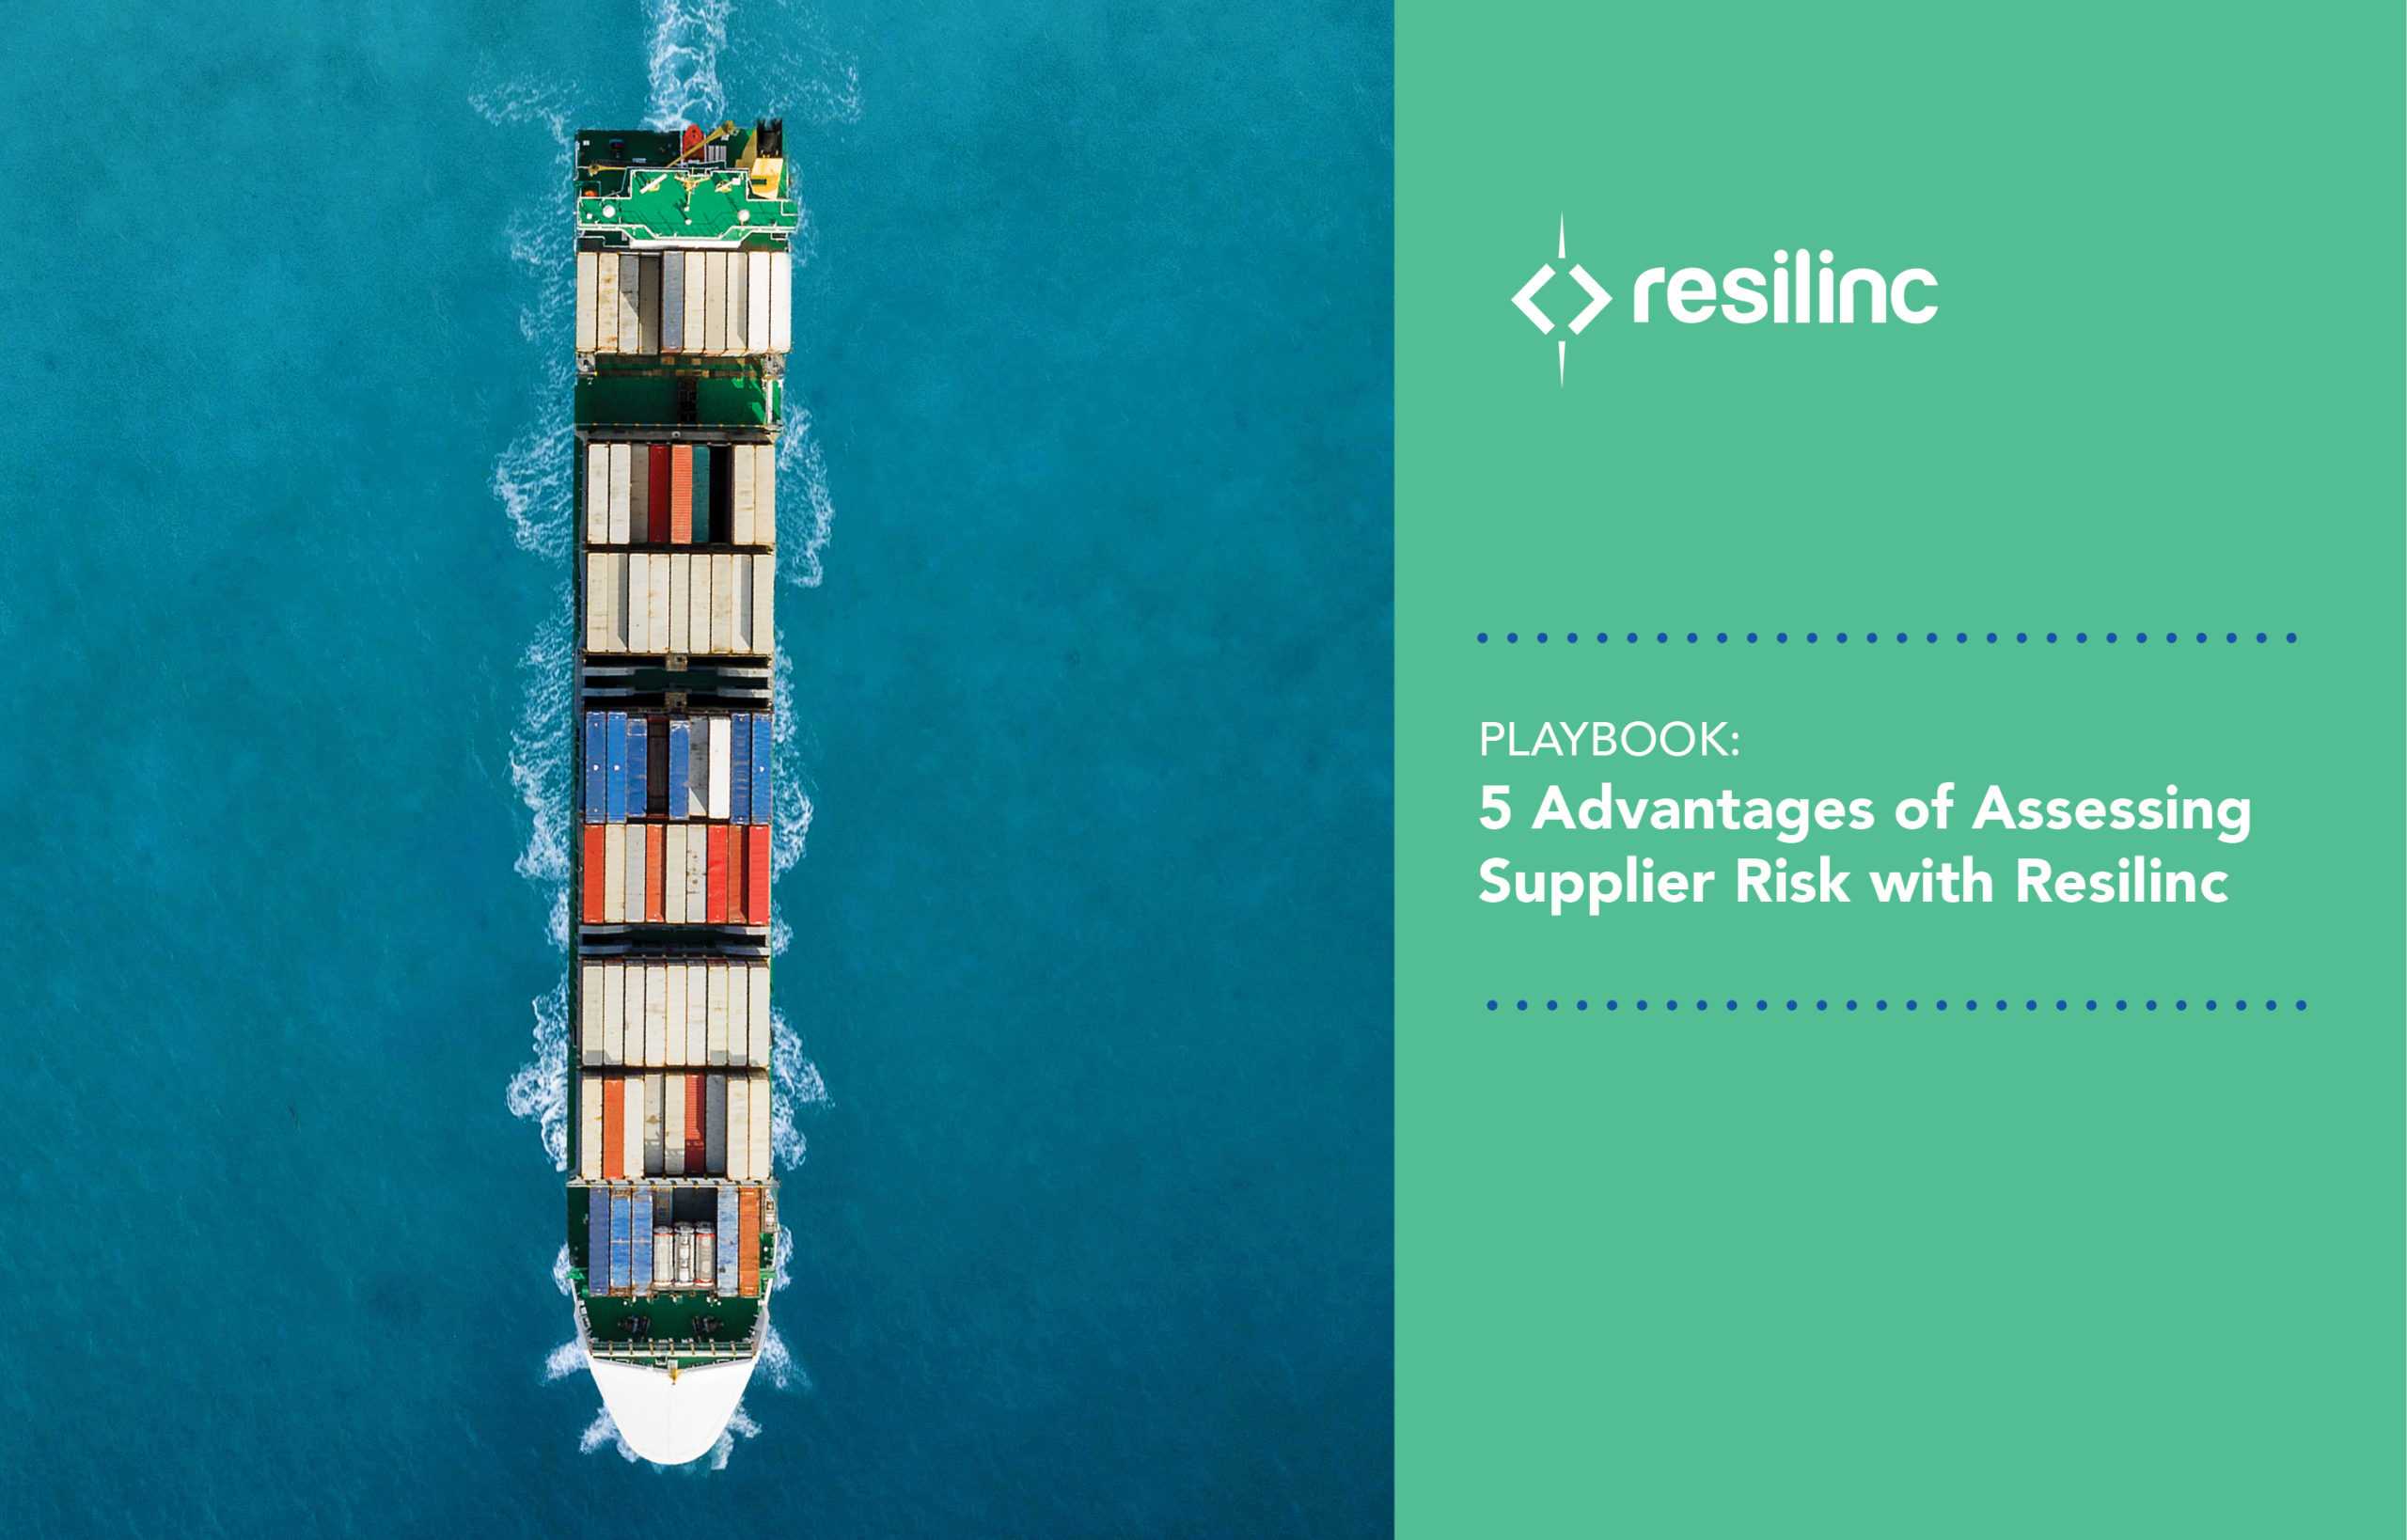 5 Advantages of Assessing Supplier Risk with Resilinc